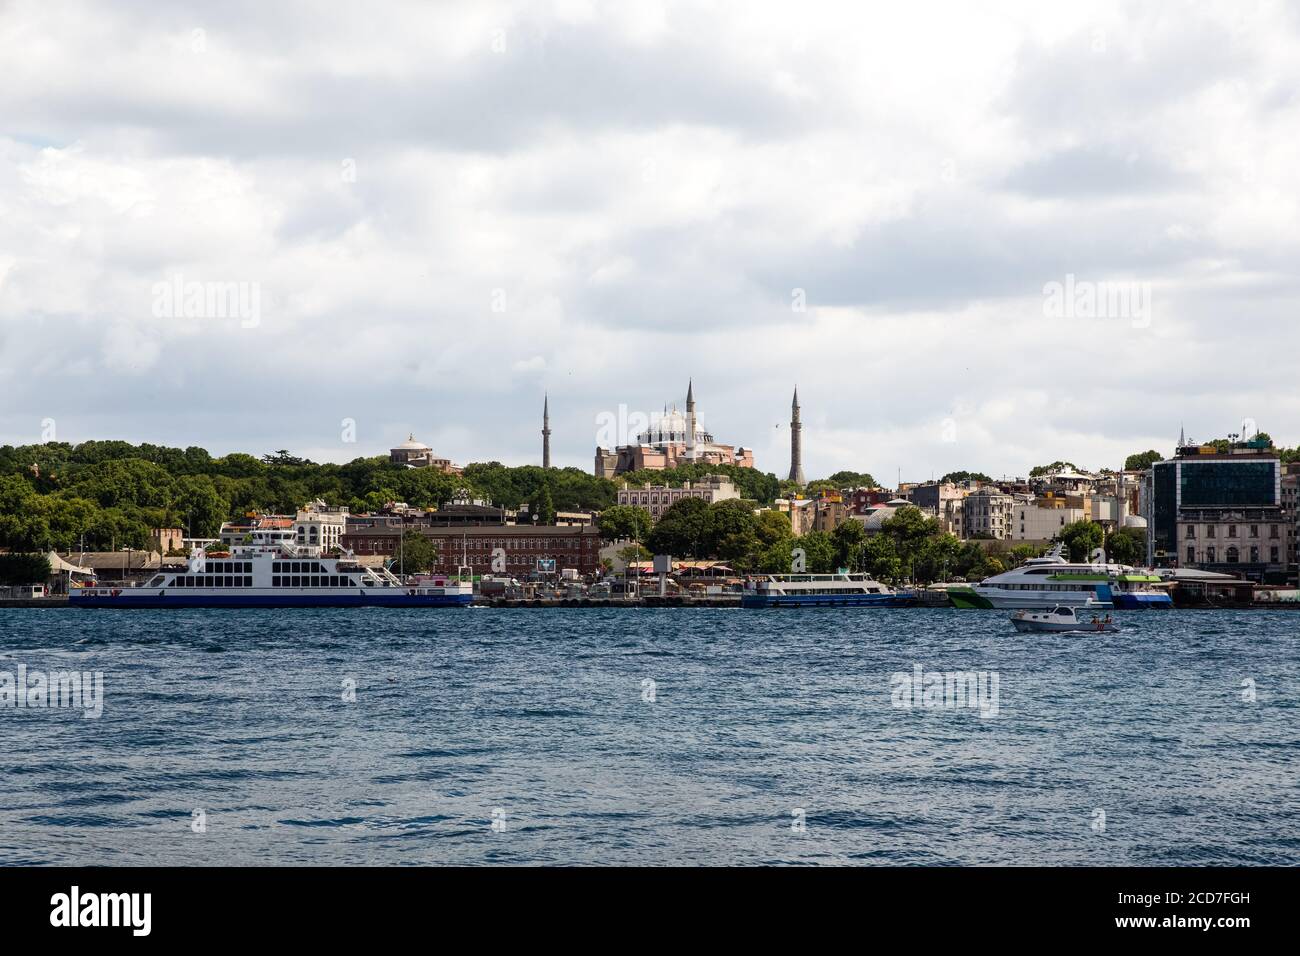 Panoramic shot of the old town Istanbul; The Hagia Sophia (Ayasofya) Mosque Eminonu, ferries and boats on the Golden Horn, Istanbul, Turkey. Stock Photo